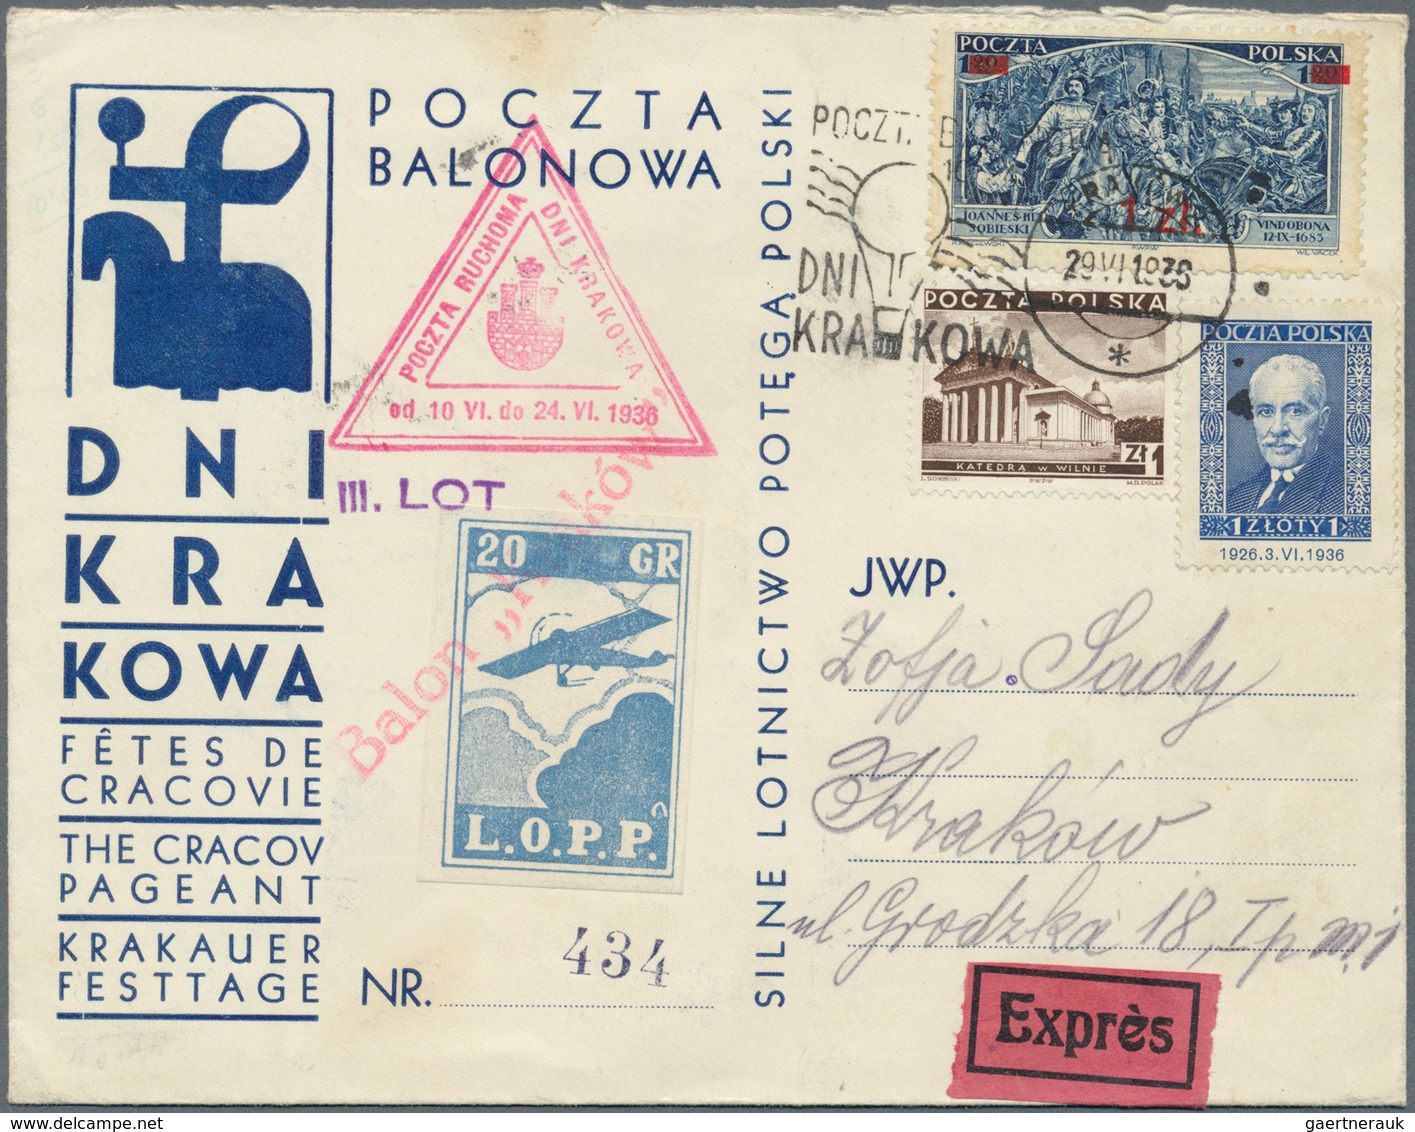 Ballonpost: 1936, 29.VI., Poland, balloon "Kraków", 1st-3rd flight, four covers/card showing all cac